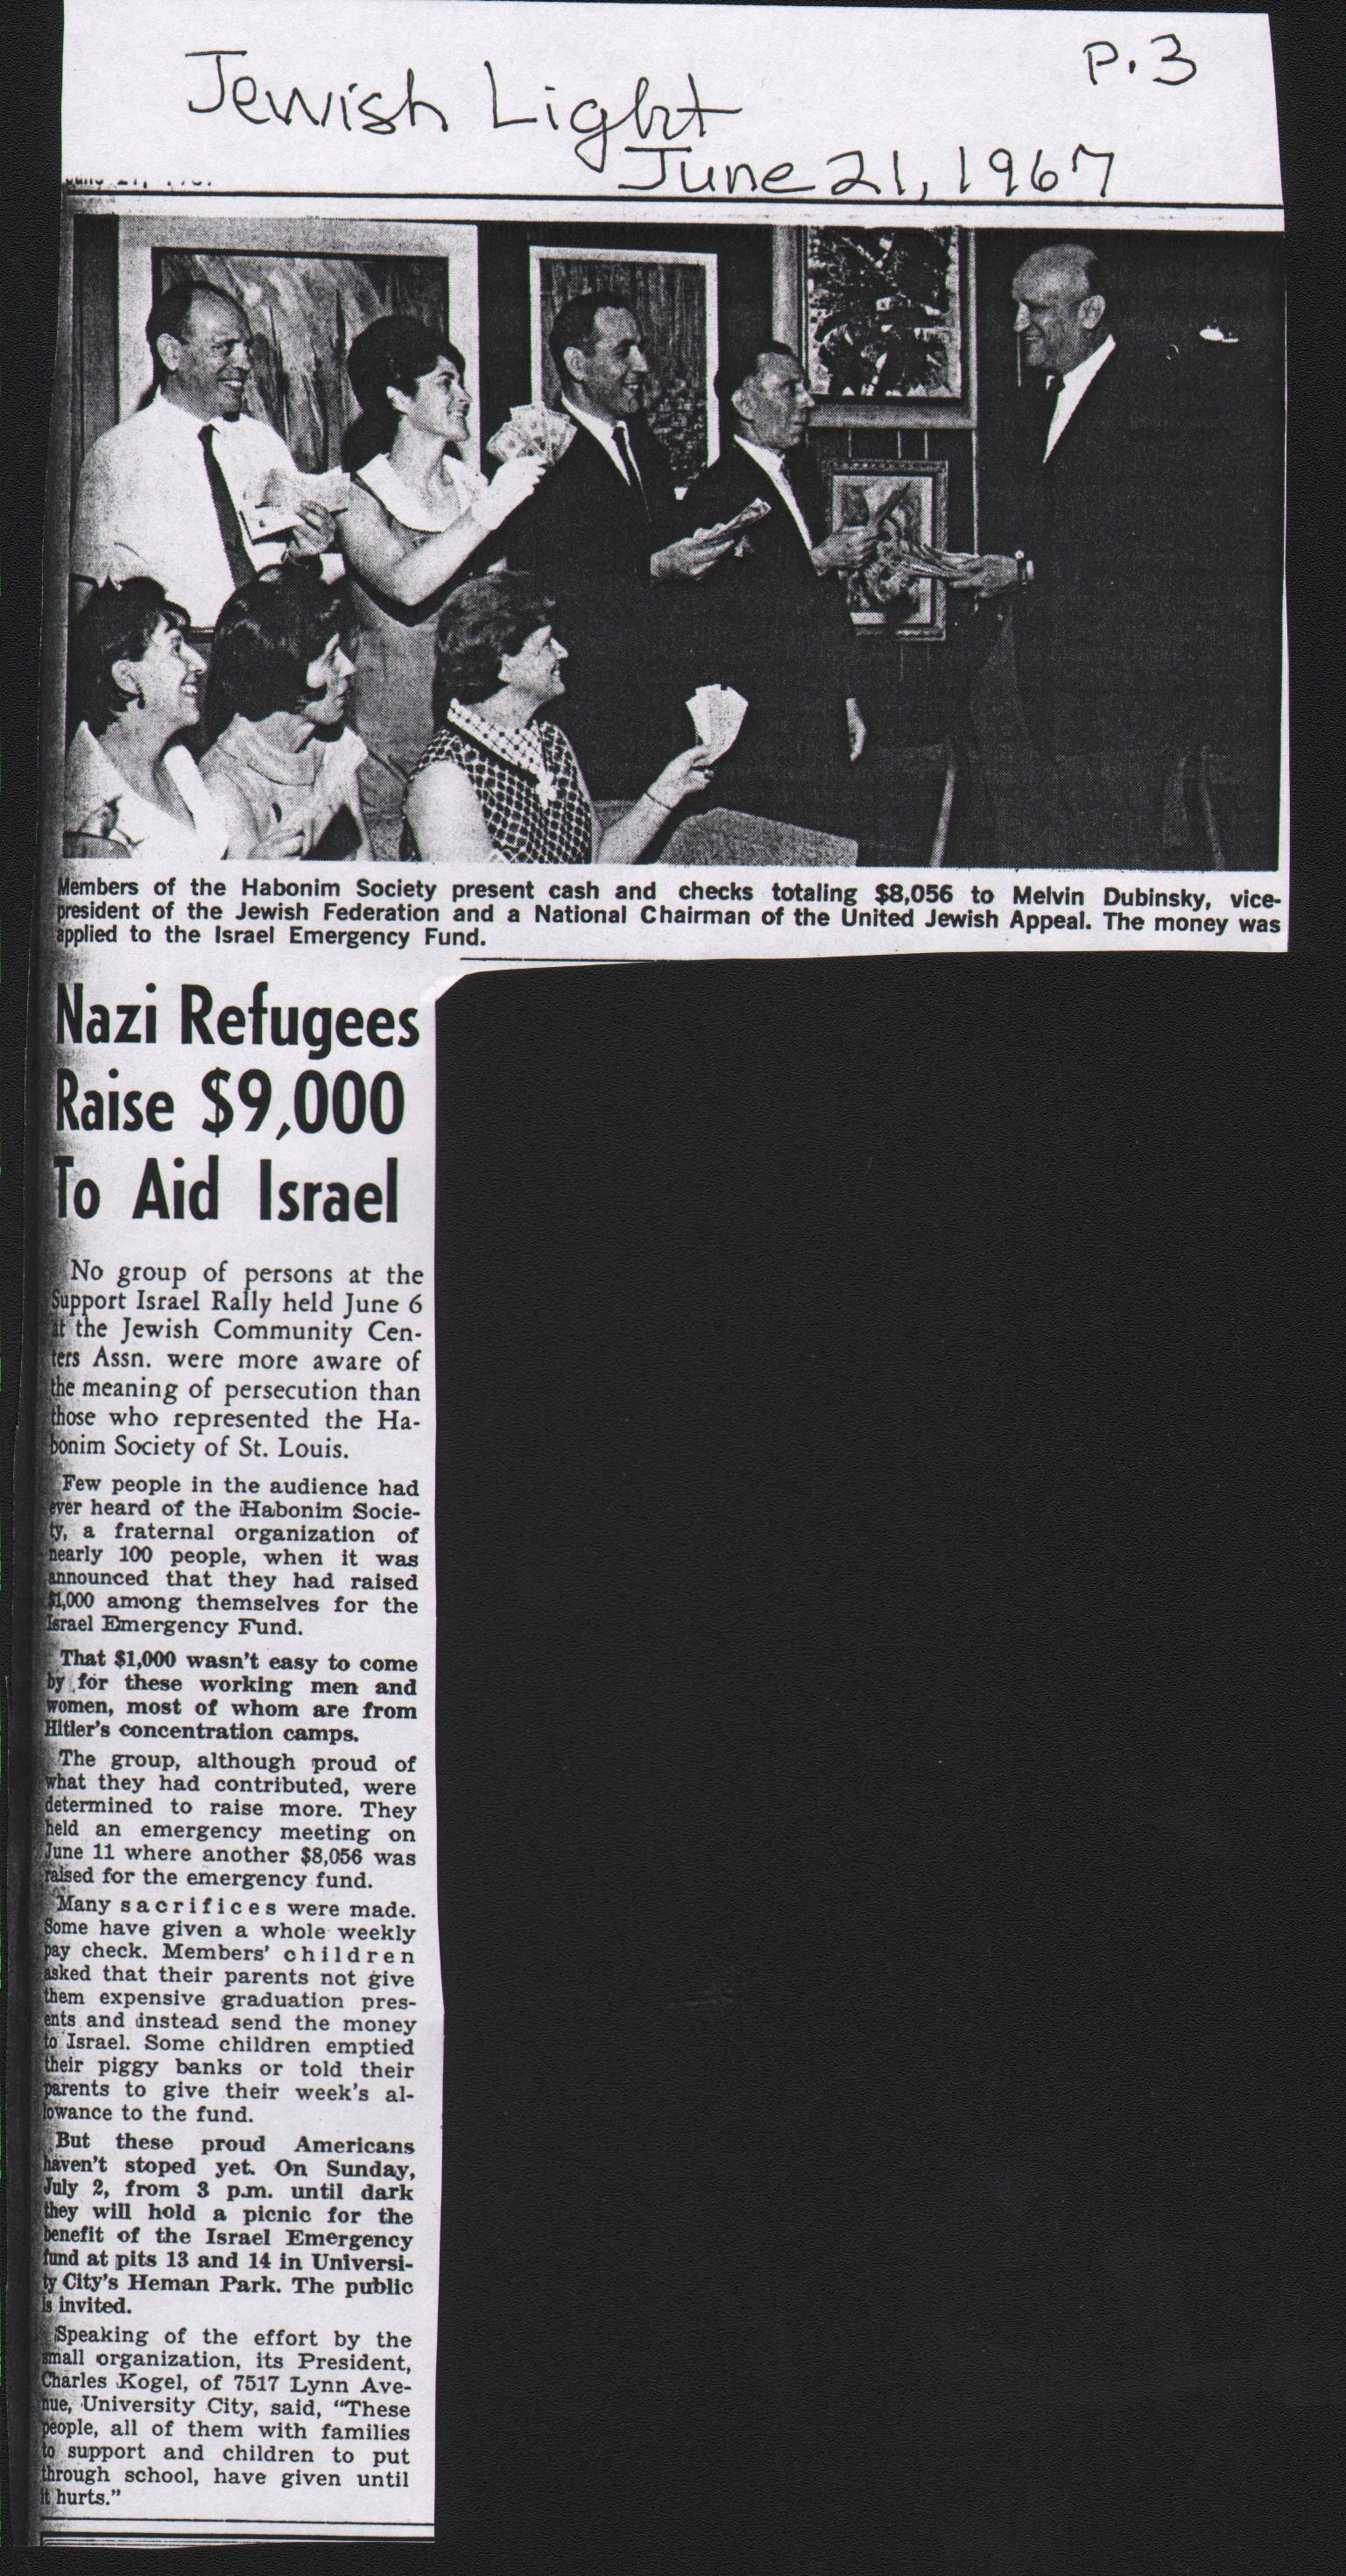 Newspaper clipping about Habonim Society